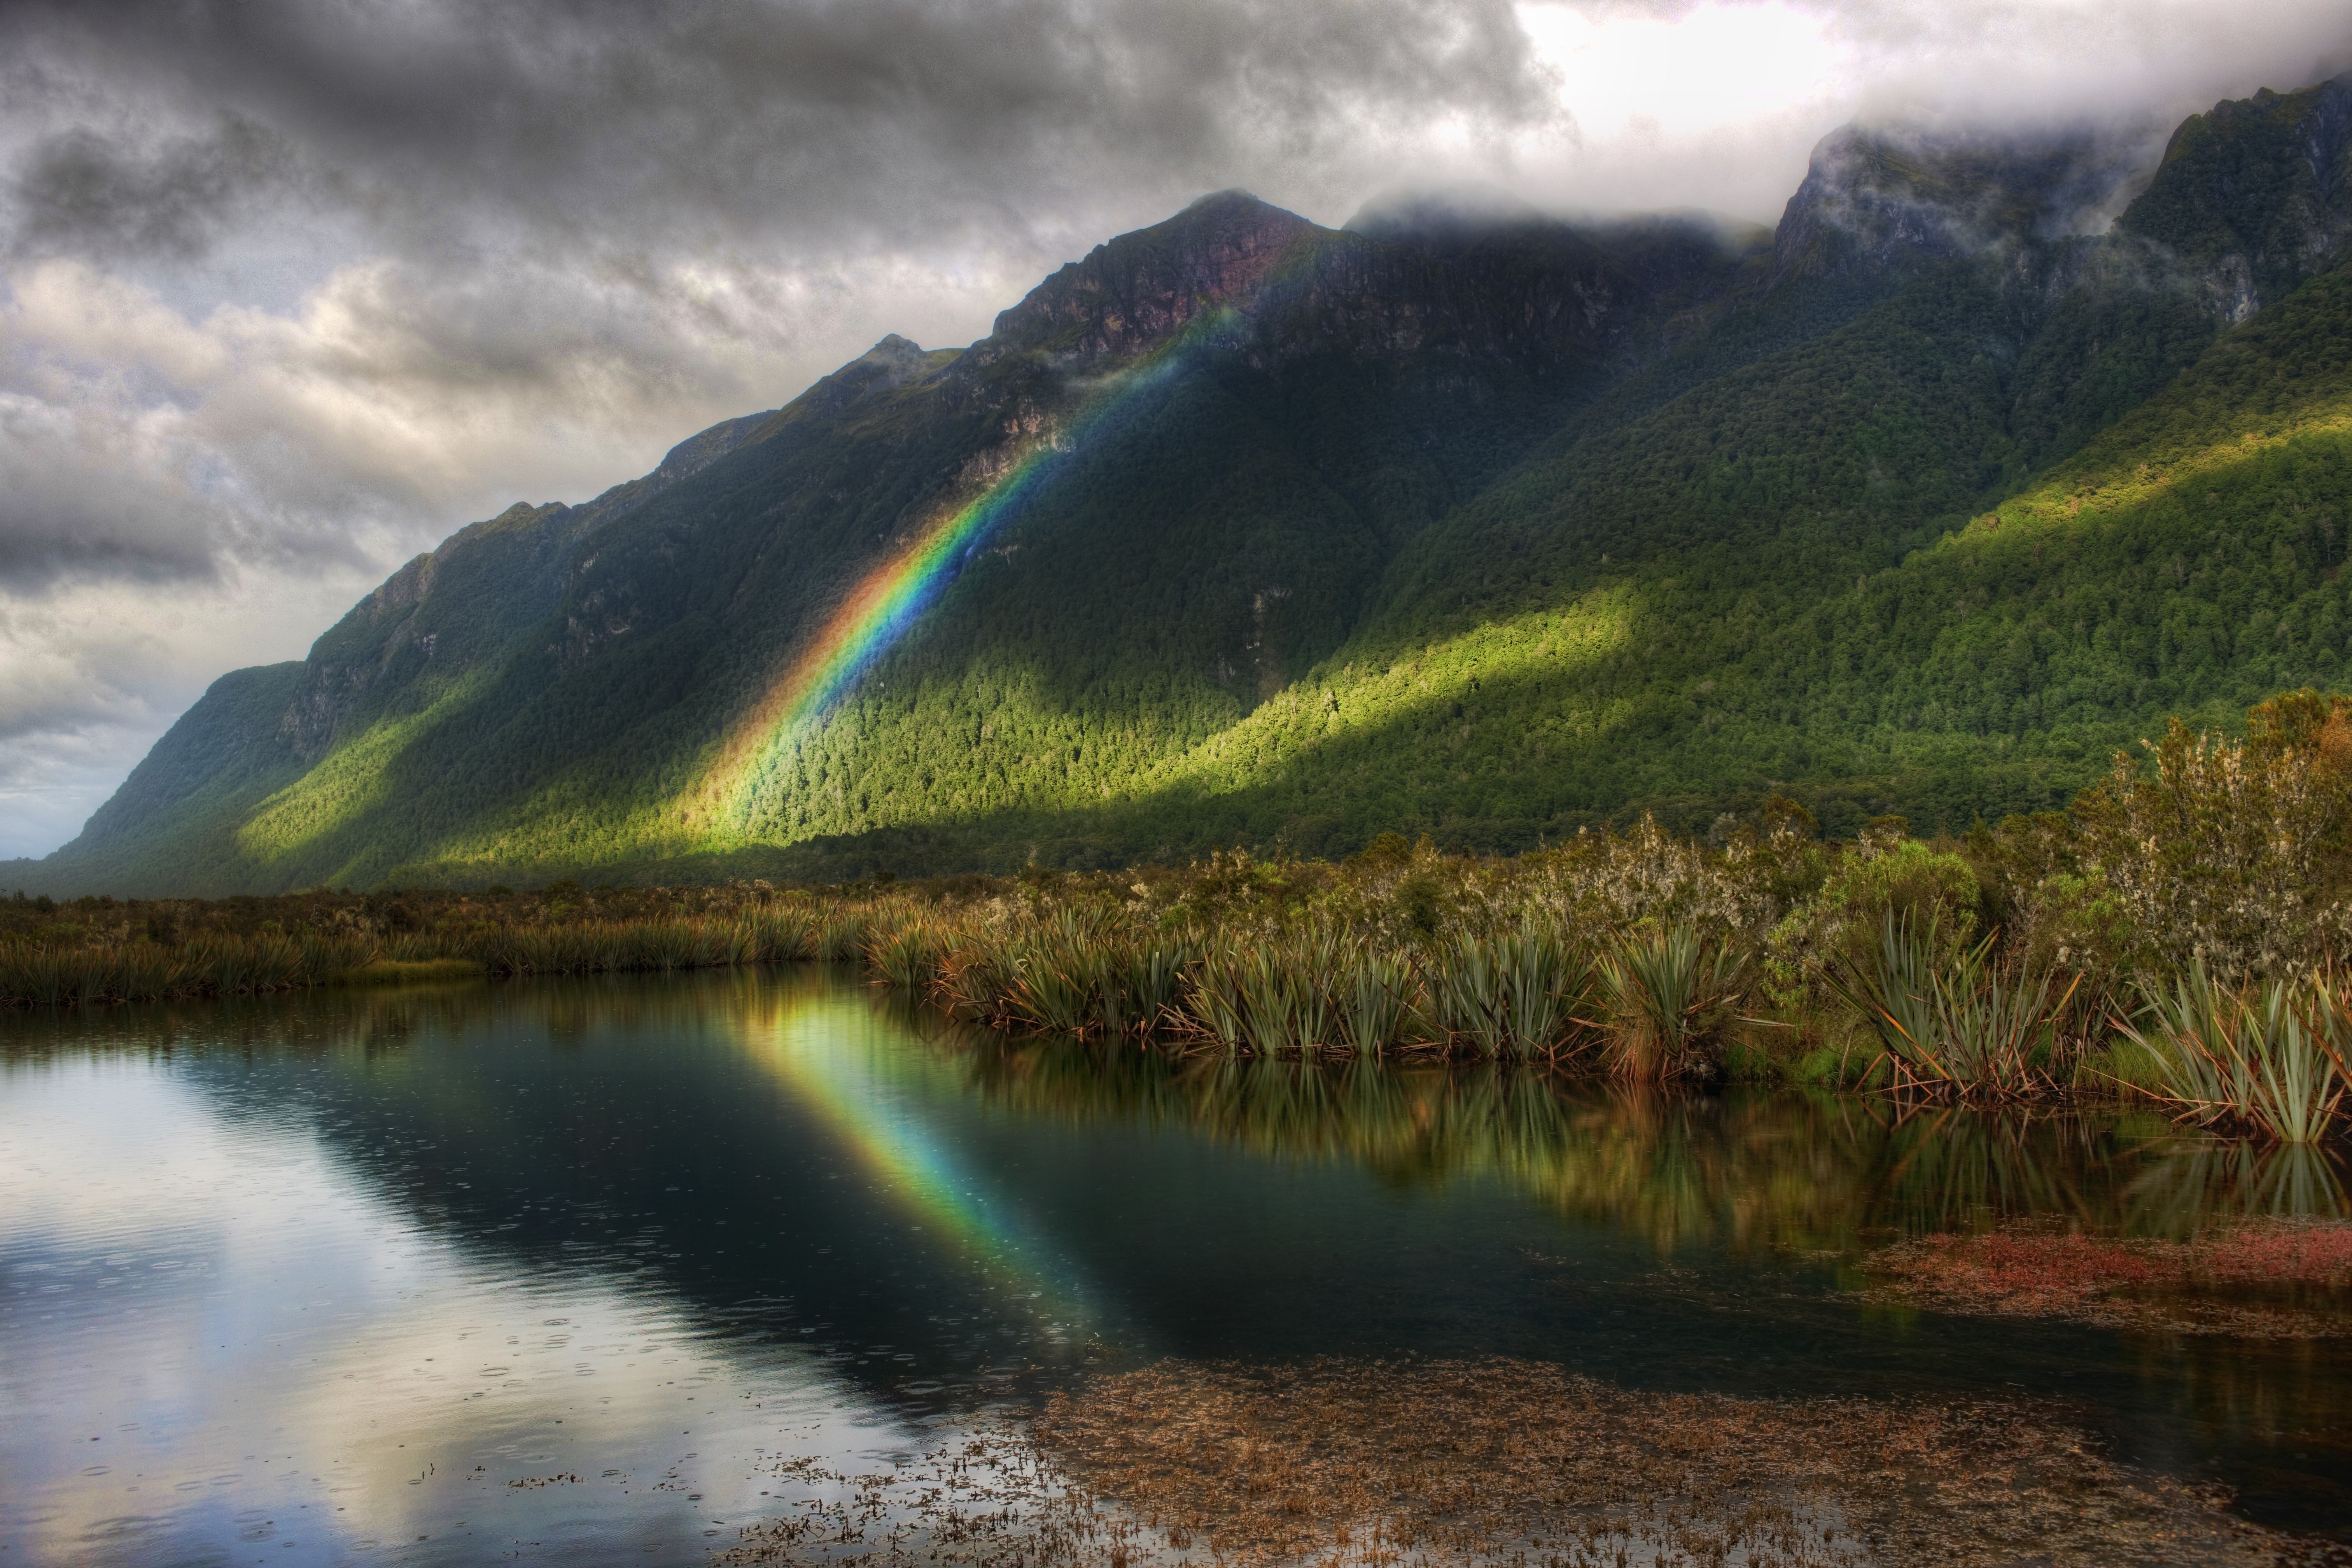 Wallpapers Mountain Splendor Green Mountains Peaceful New Reflection Rainbow Forest on the desktop